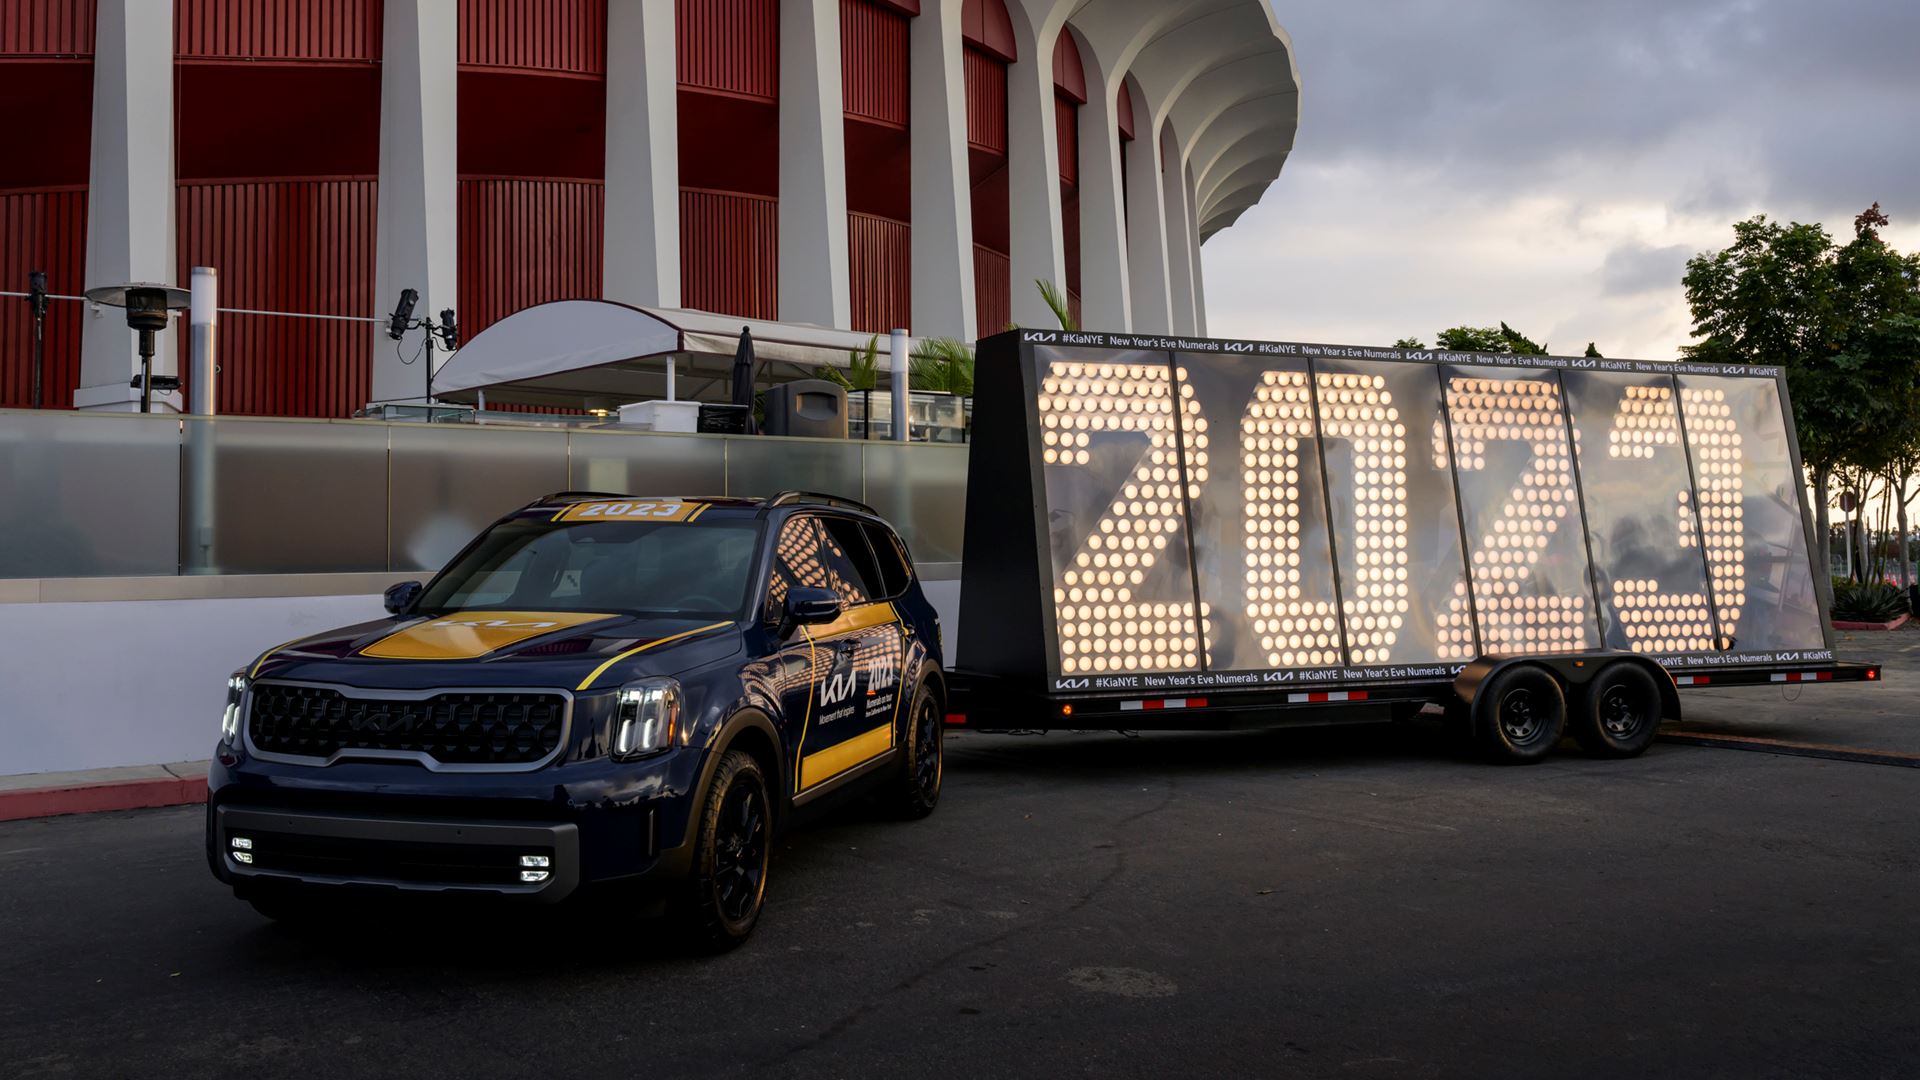 Kia America Heralds Start of 2023 Celebration With Nationwide Tour of